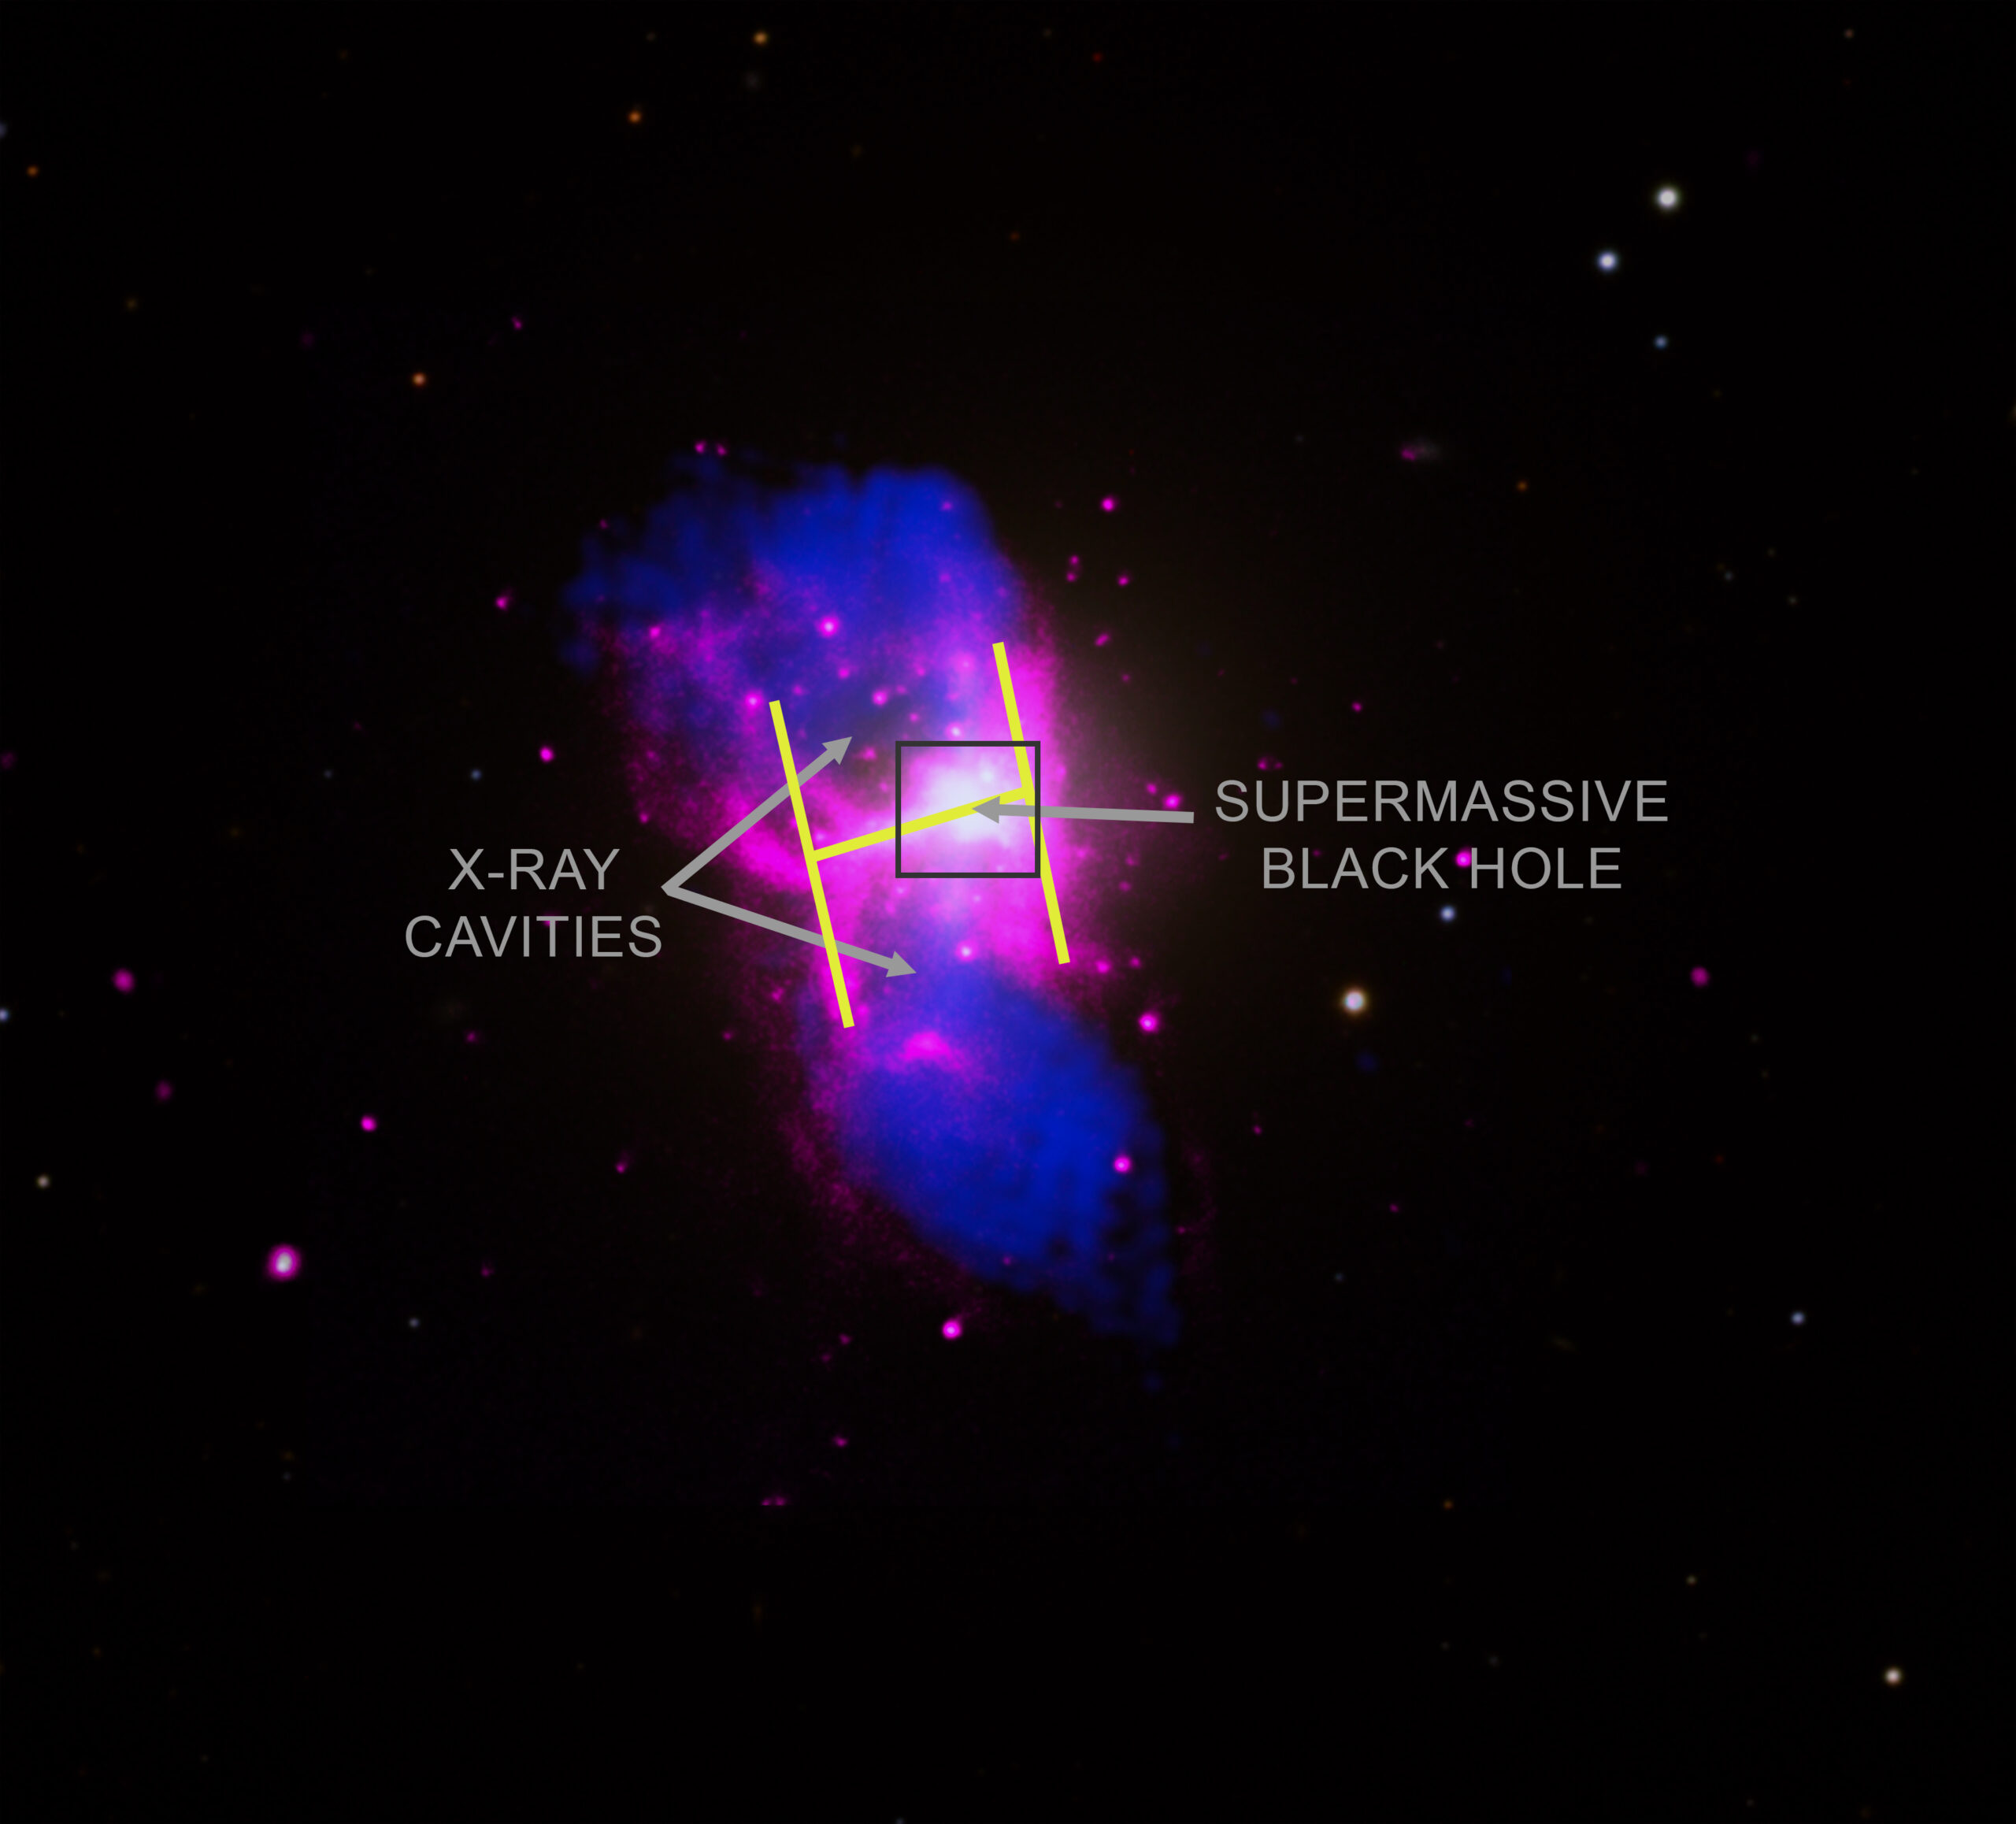 This is a composite image of M84 with X-ray data from Chandra (blue) and radio emission from the Very Large Array (red) overlaid on an optical image.  A number of bubbles generated from the supermassive black hole at the center of this giant galaxy are visible in this image.  The particles that create these bubbles travel outward from the black hole in the form of a two-sided jet.  Smaller bubbles are found within larger ones, and this nesting provides clear evidence for repeated outbursts from the central black hole.